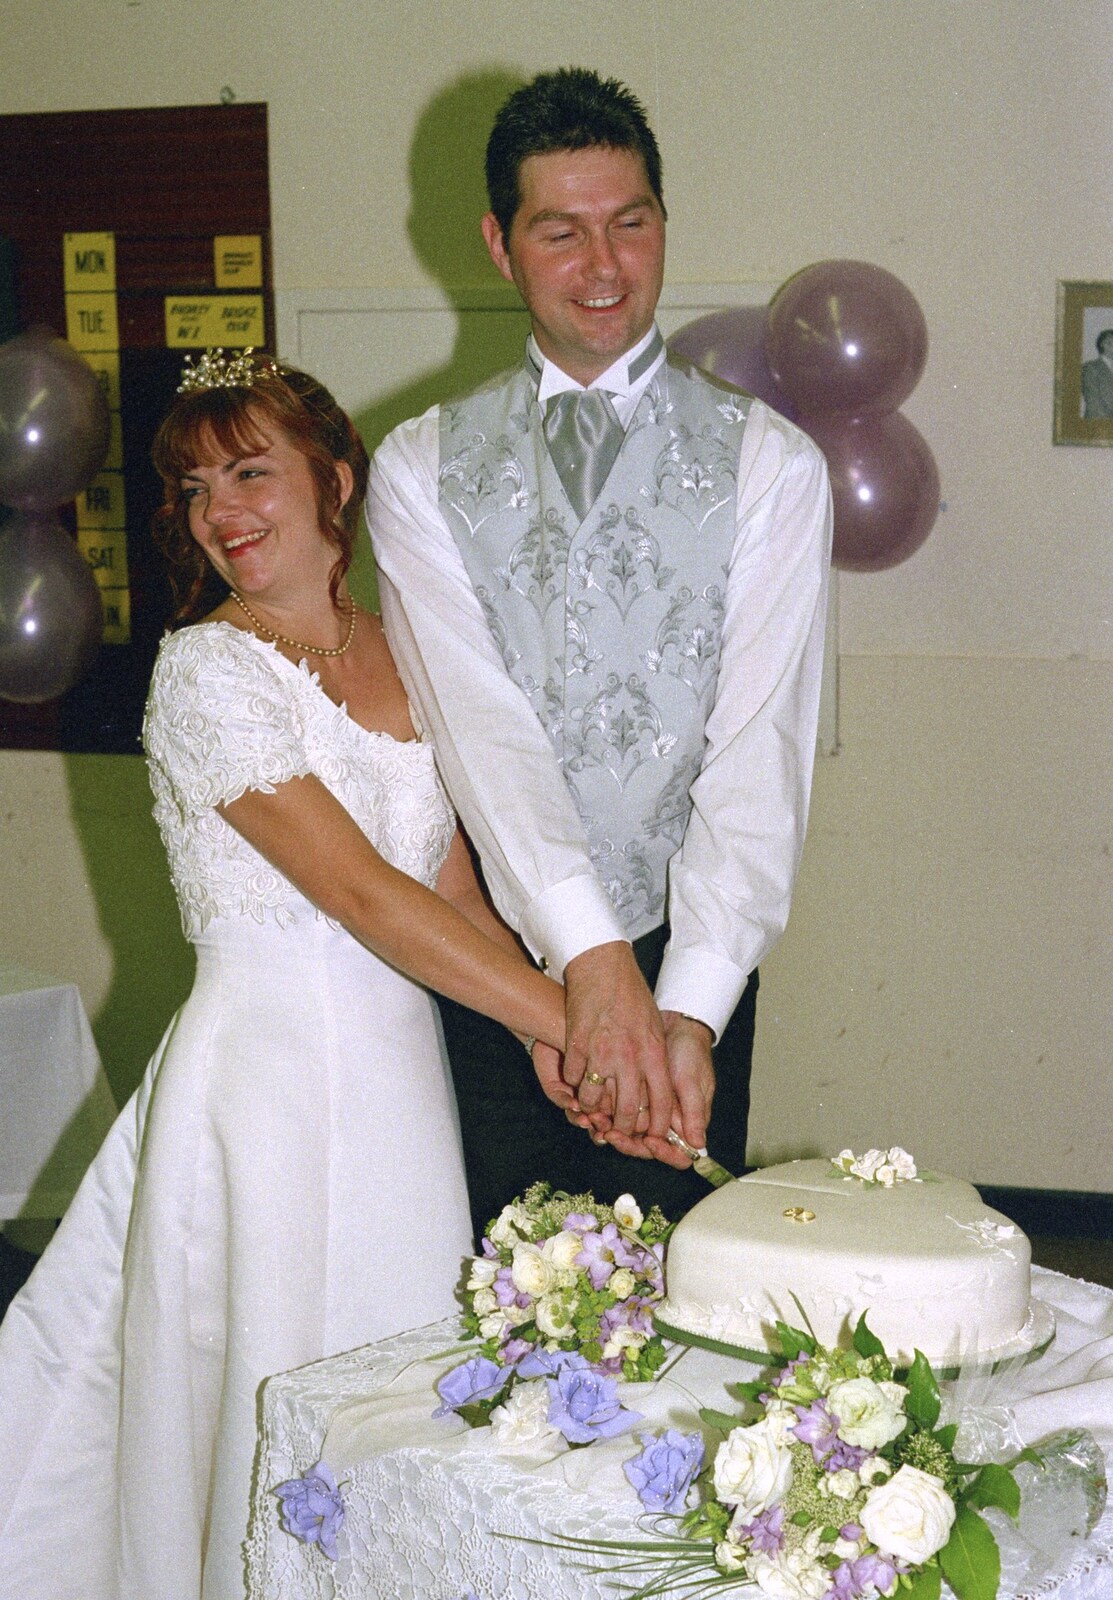 Sean chops cake with his eyes closed from Sean and Michelle's Wedding, Bashley FC, New Milton - 12th August 2000